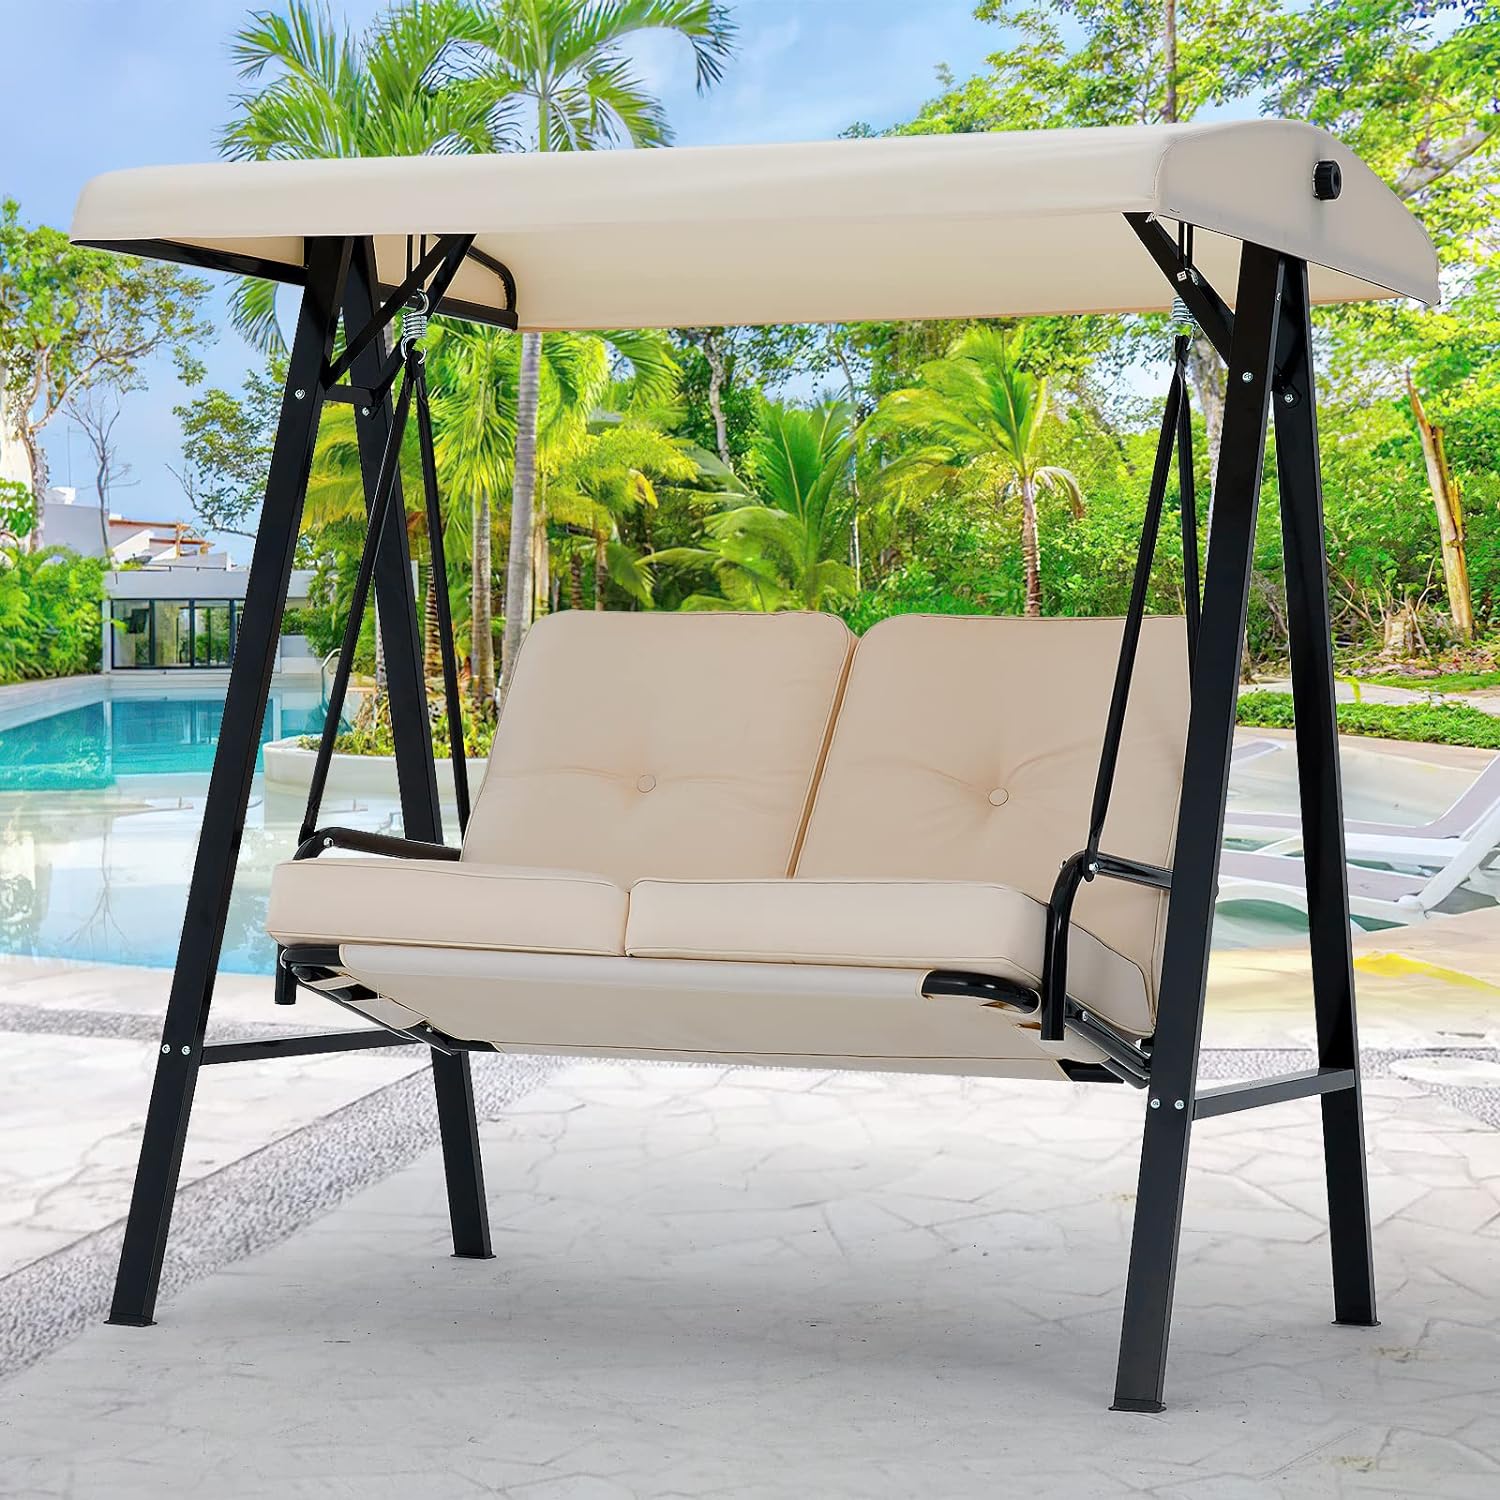 AECOJOY 2-Seat Porch Swing Chair, Patio Swing Chair with Stand and Removable Cushions, Outdoor Canopy Swing Chair for Outside, Backyard, Garden(Beige Cushion&Steel Frame)